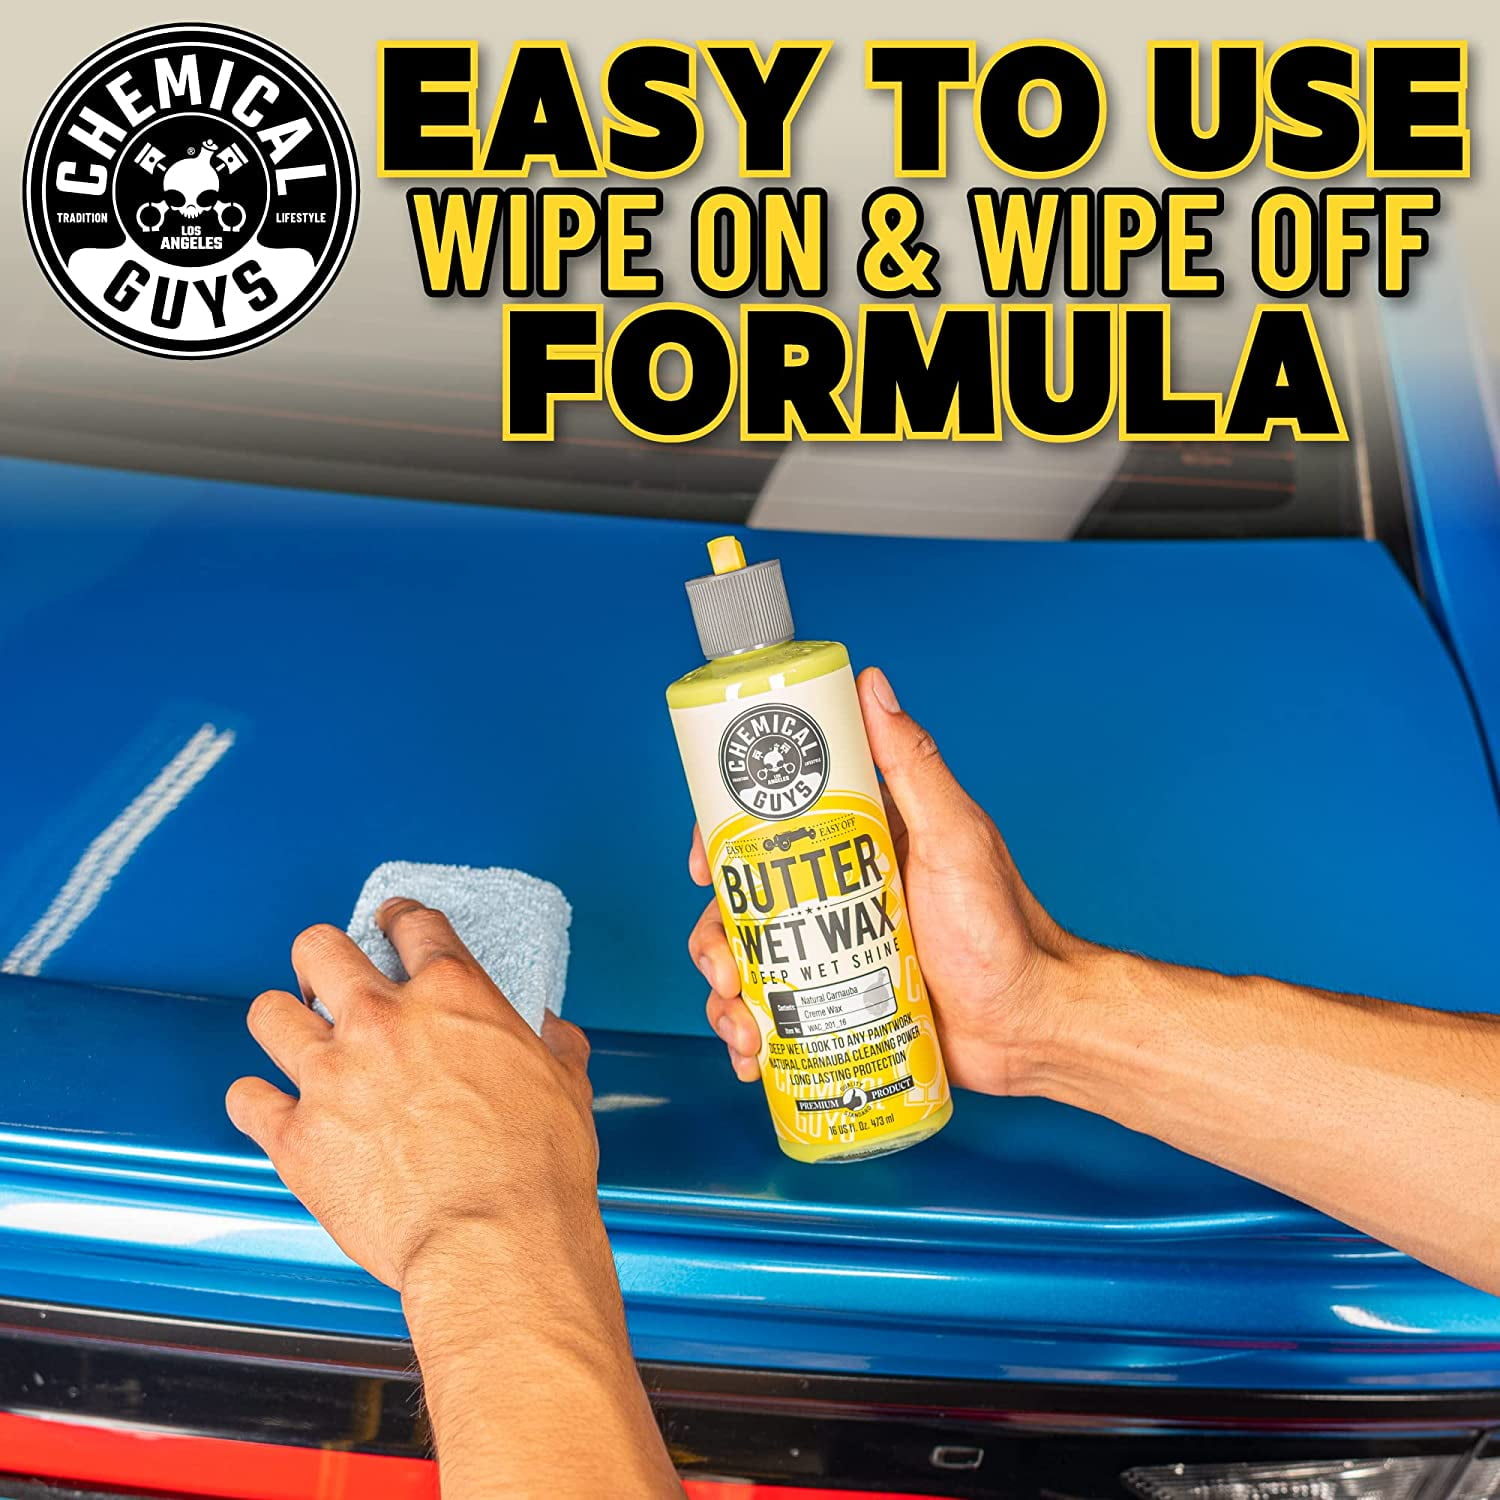 Chemical Guys MFG. Co. - Get wet, with @chemicalguys Butter Wet Wax! Shared  up by @lsxtasy #detailgarage #detailgaragekitchener #detailgaragemissisauga  #chemicalguyscanada #chemicalguys #detail #detailing #clean #shine #gloss  #depth #paintprotection